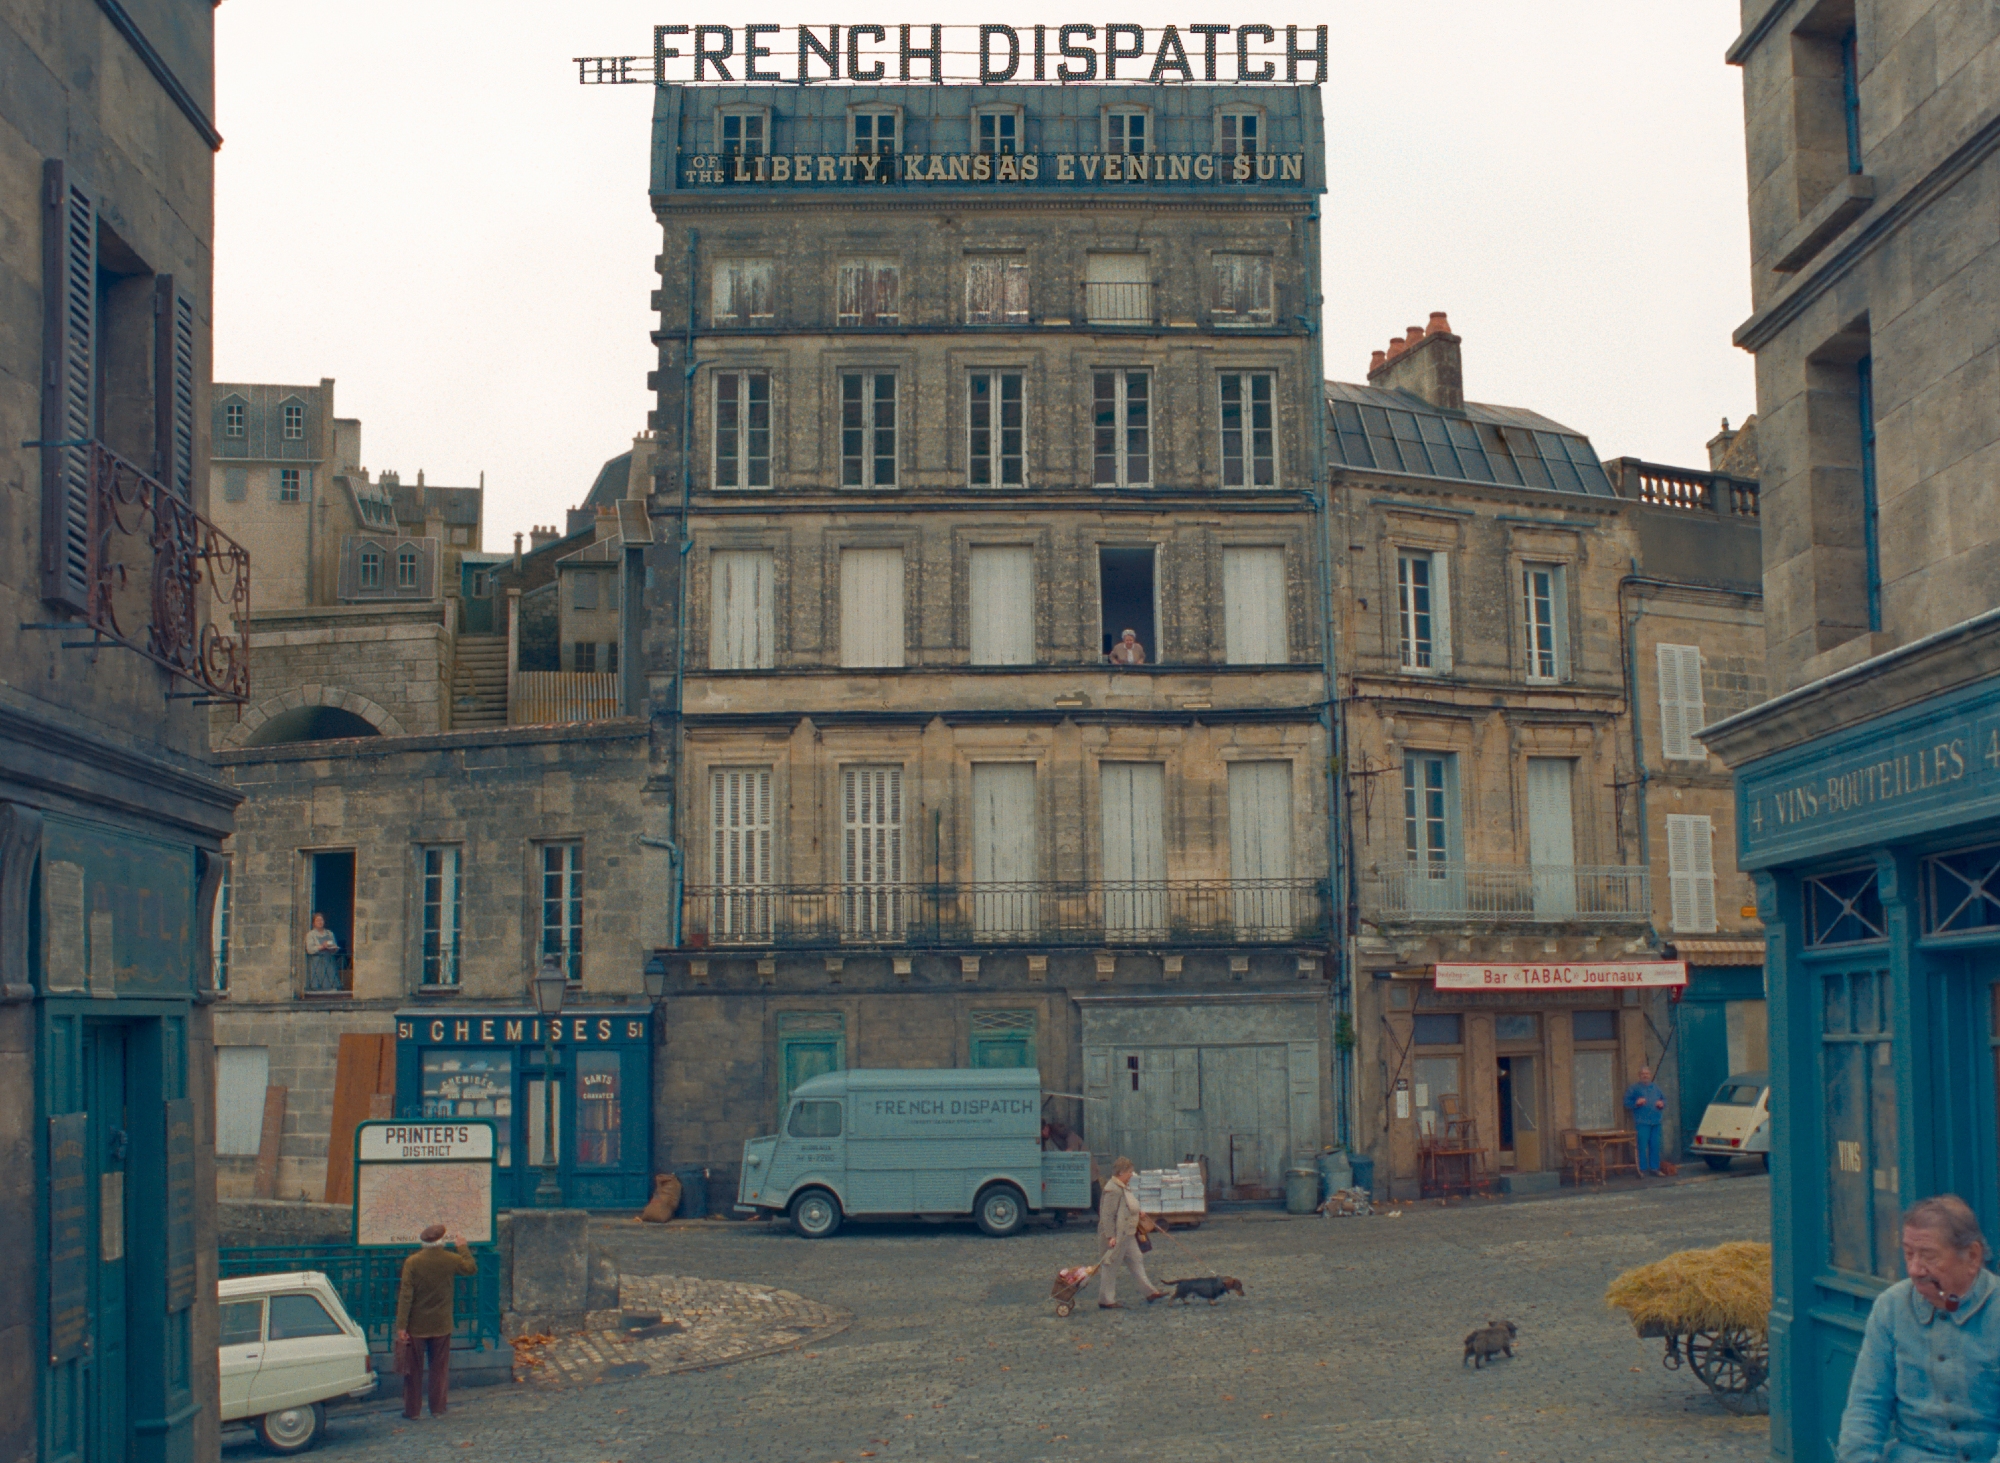 'The French Dispatch' exterior shot with a van in front